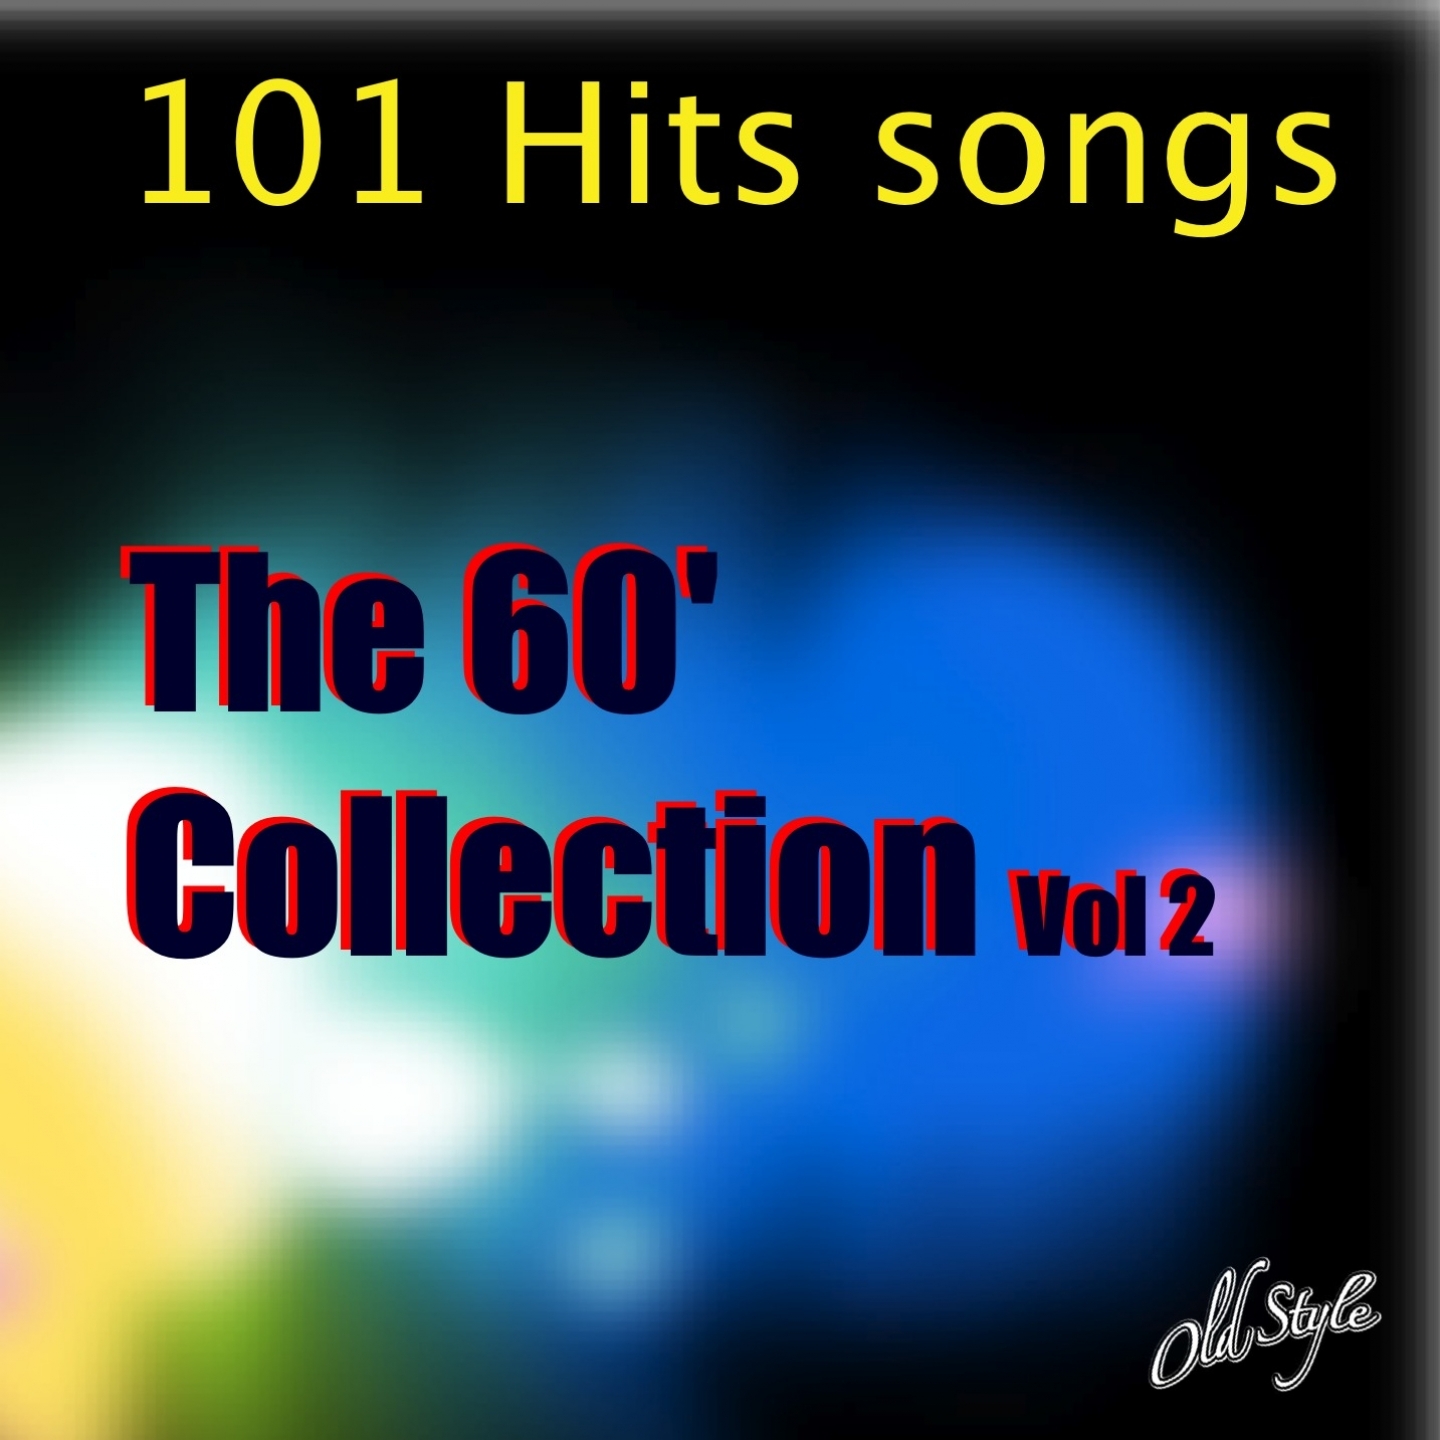 The 60' Collection, Vol. 2 (101 Hits Songs)